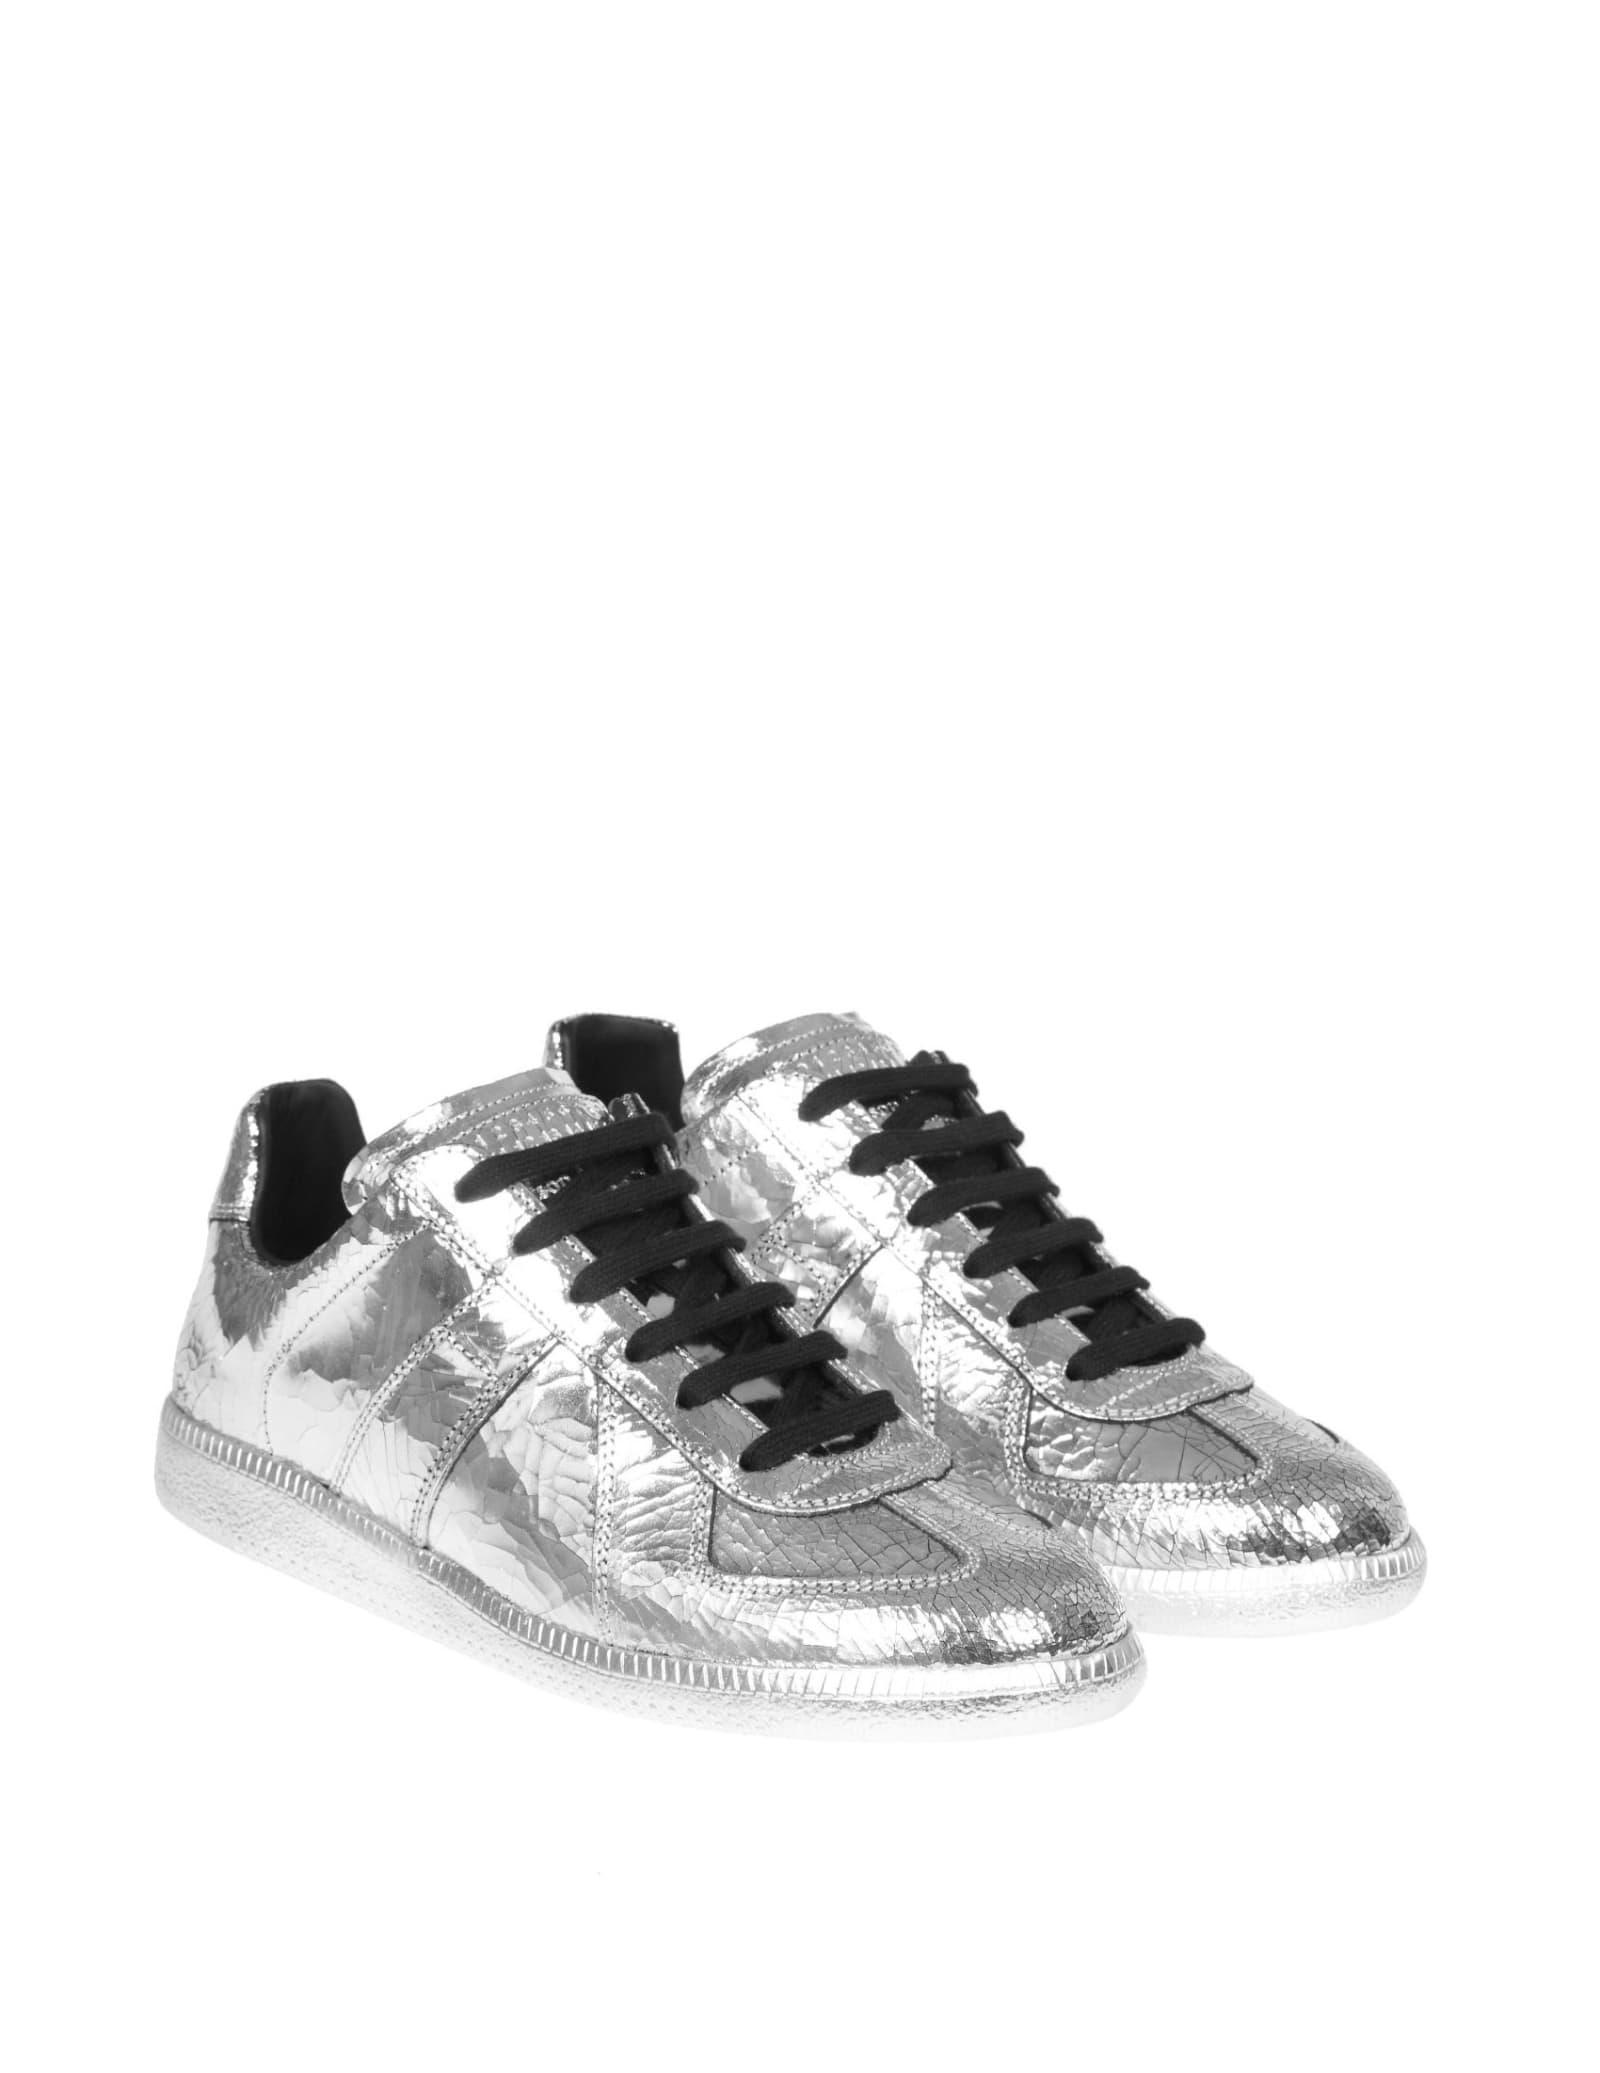 Mens Trainers Maison Margiela Trainers Maison Margiela Replica Cracked Silver Leather in Grey for Men 